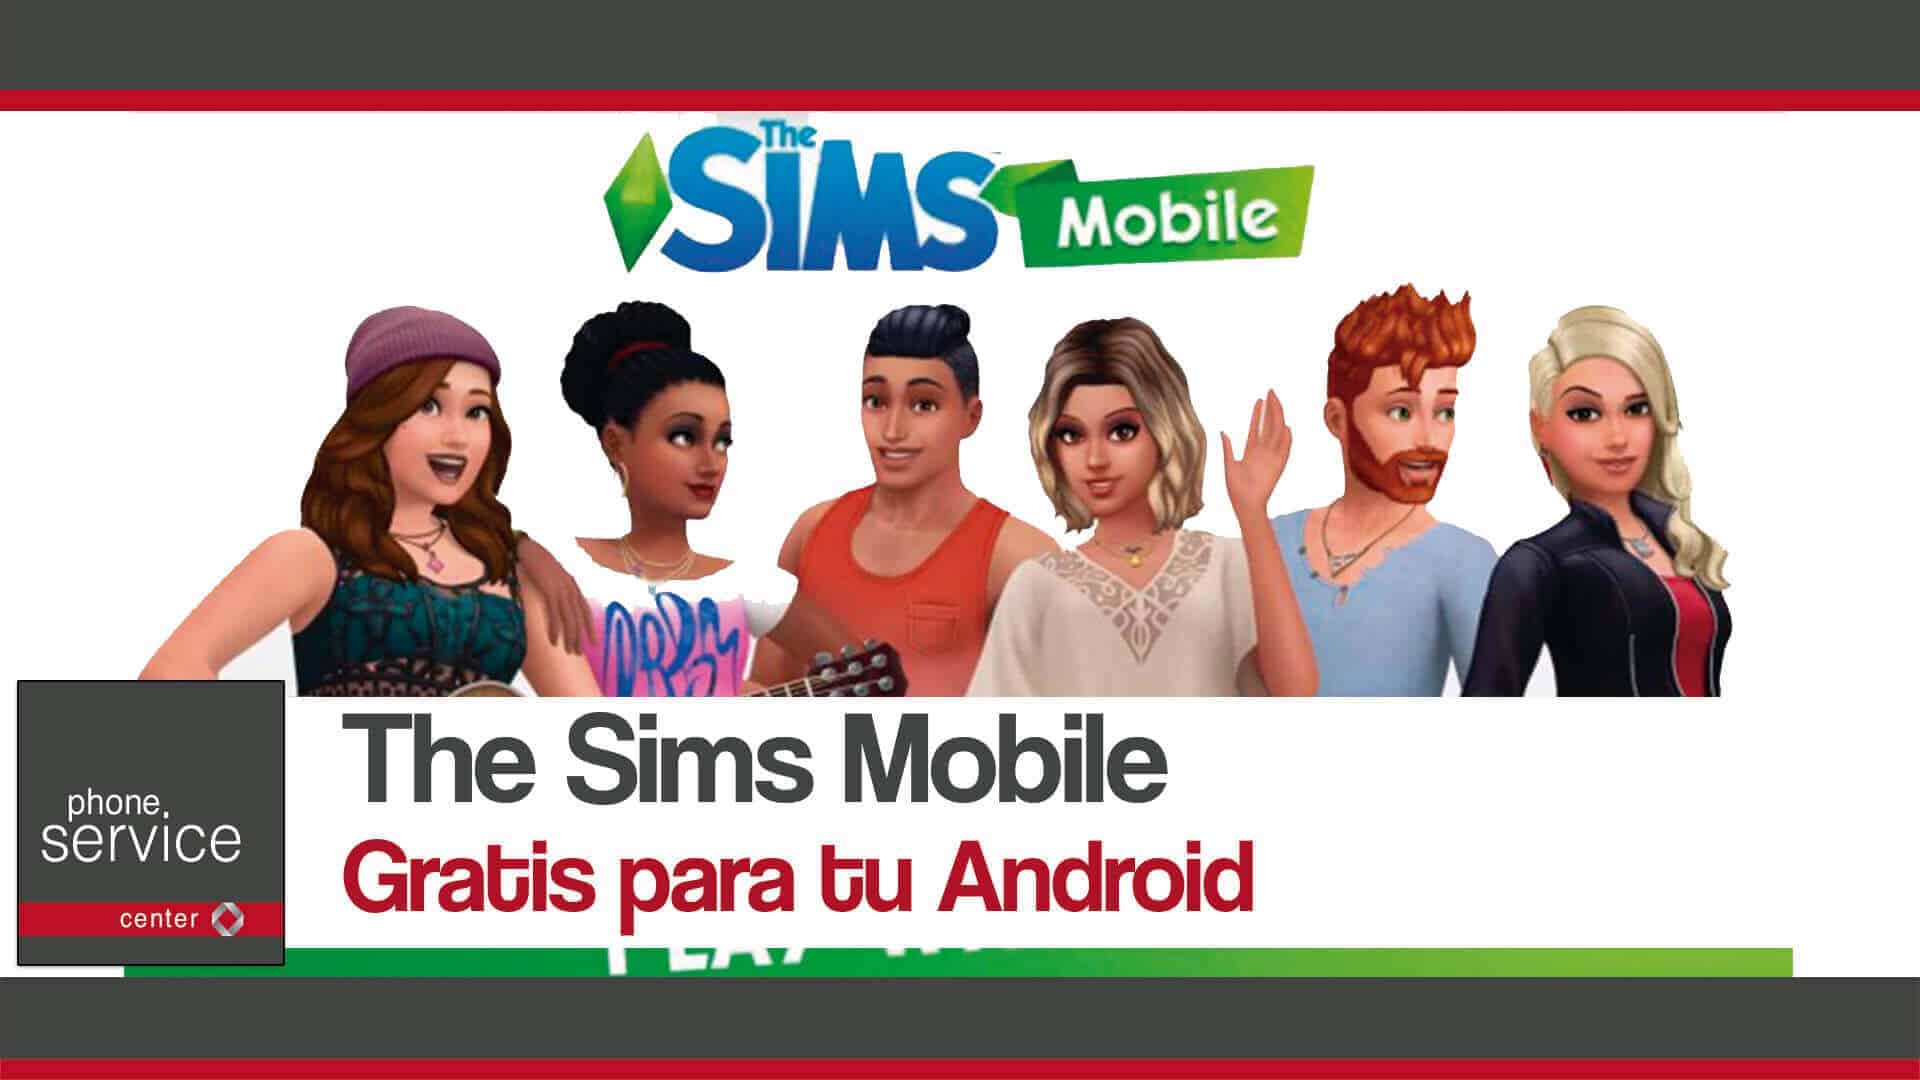 The Sims Mobile gratis para Android